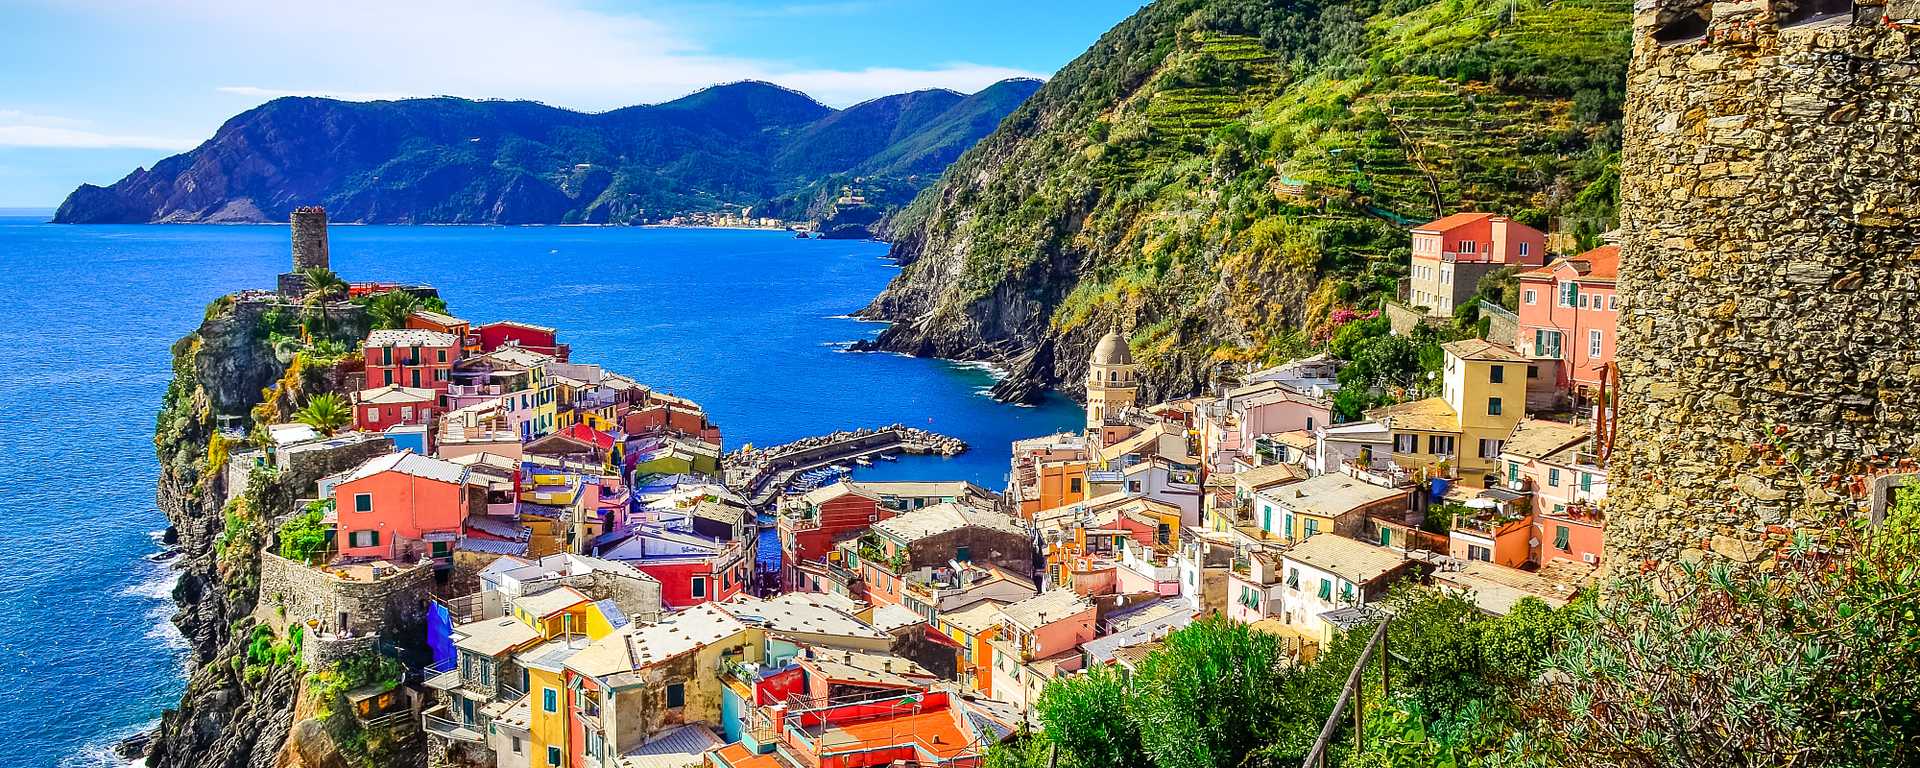 Colorful village of Vernazza in the Cinque Terre, Italy